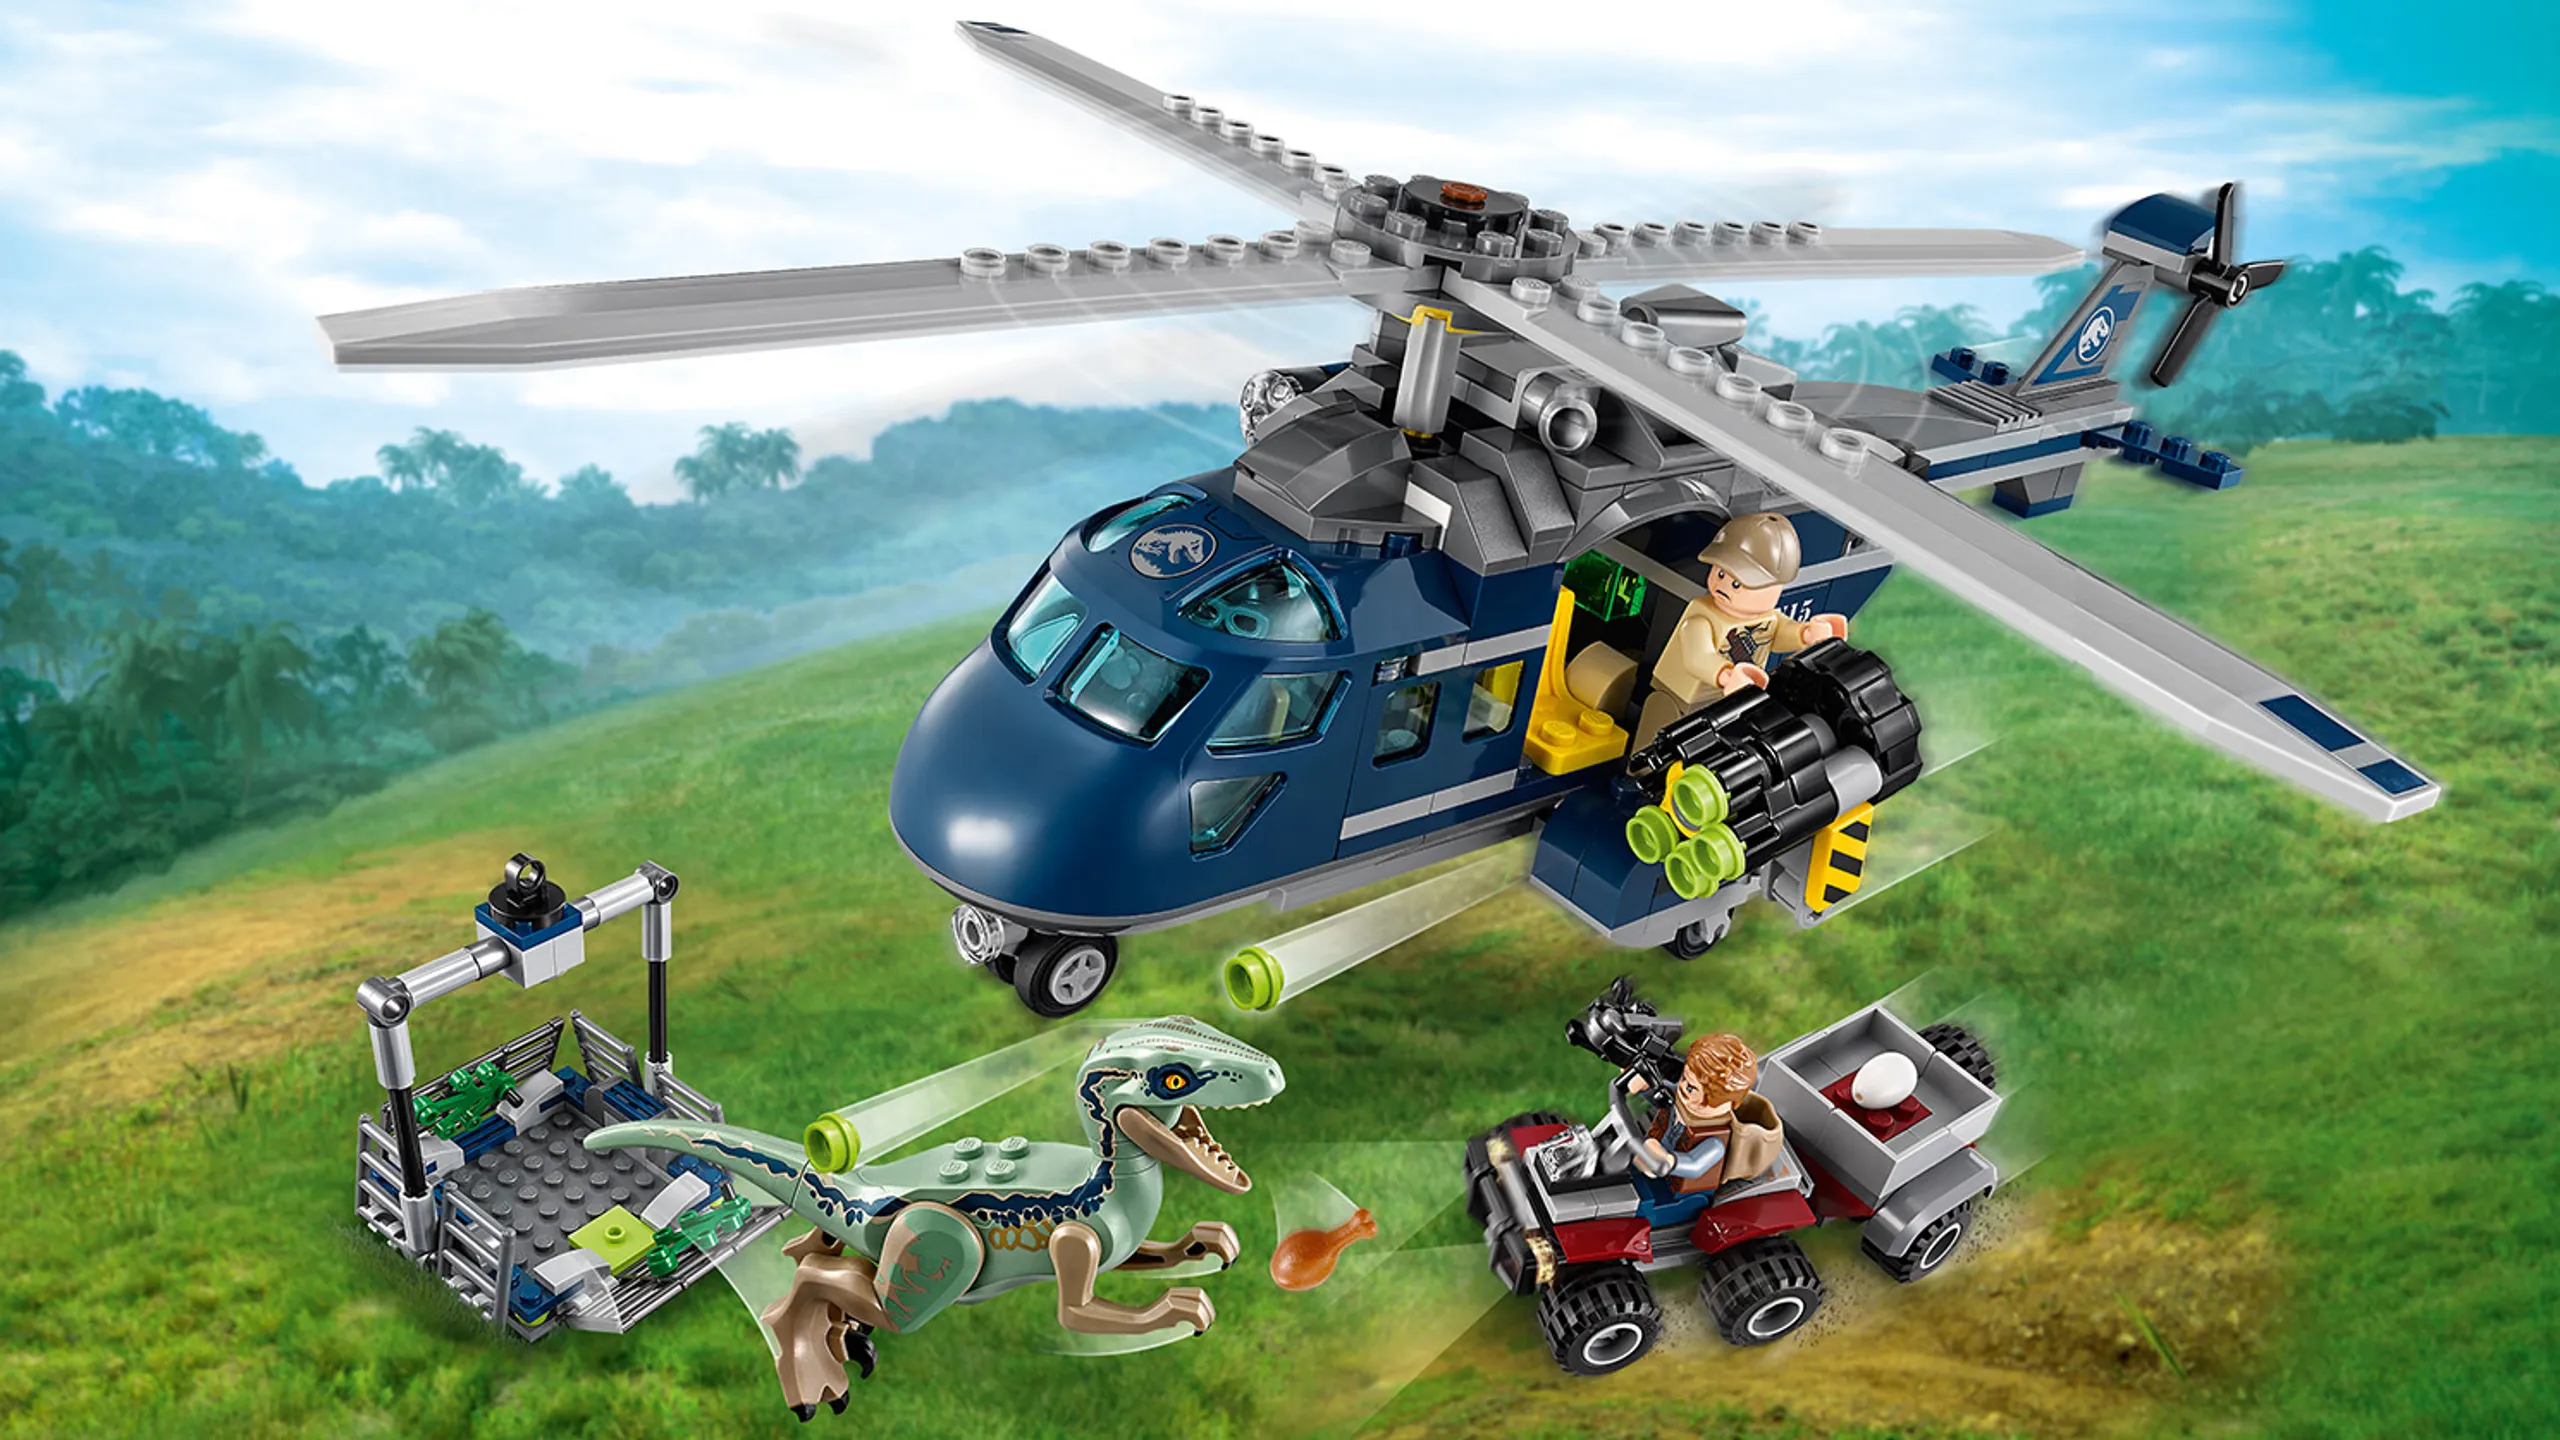 LEGO Jurassic World - 75928 Blue's Helicopter Pursuit - Owen is on land on a vehicle throwing a drumstick at Blue and Ken fires stud shooters at Blue to try and get the dinosaur back in its cage.